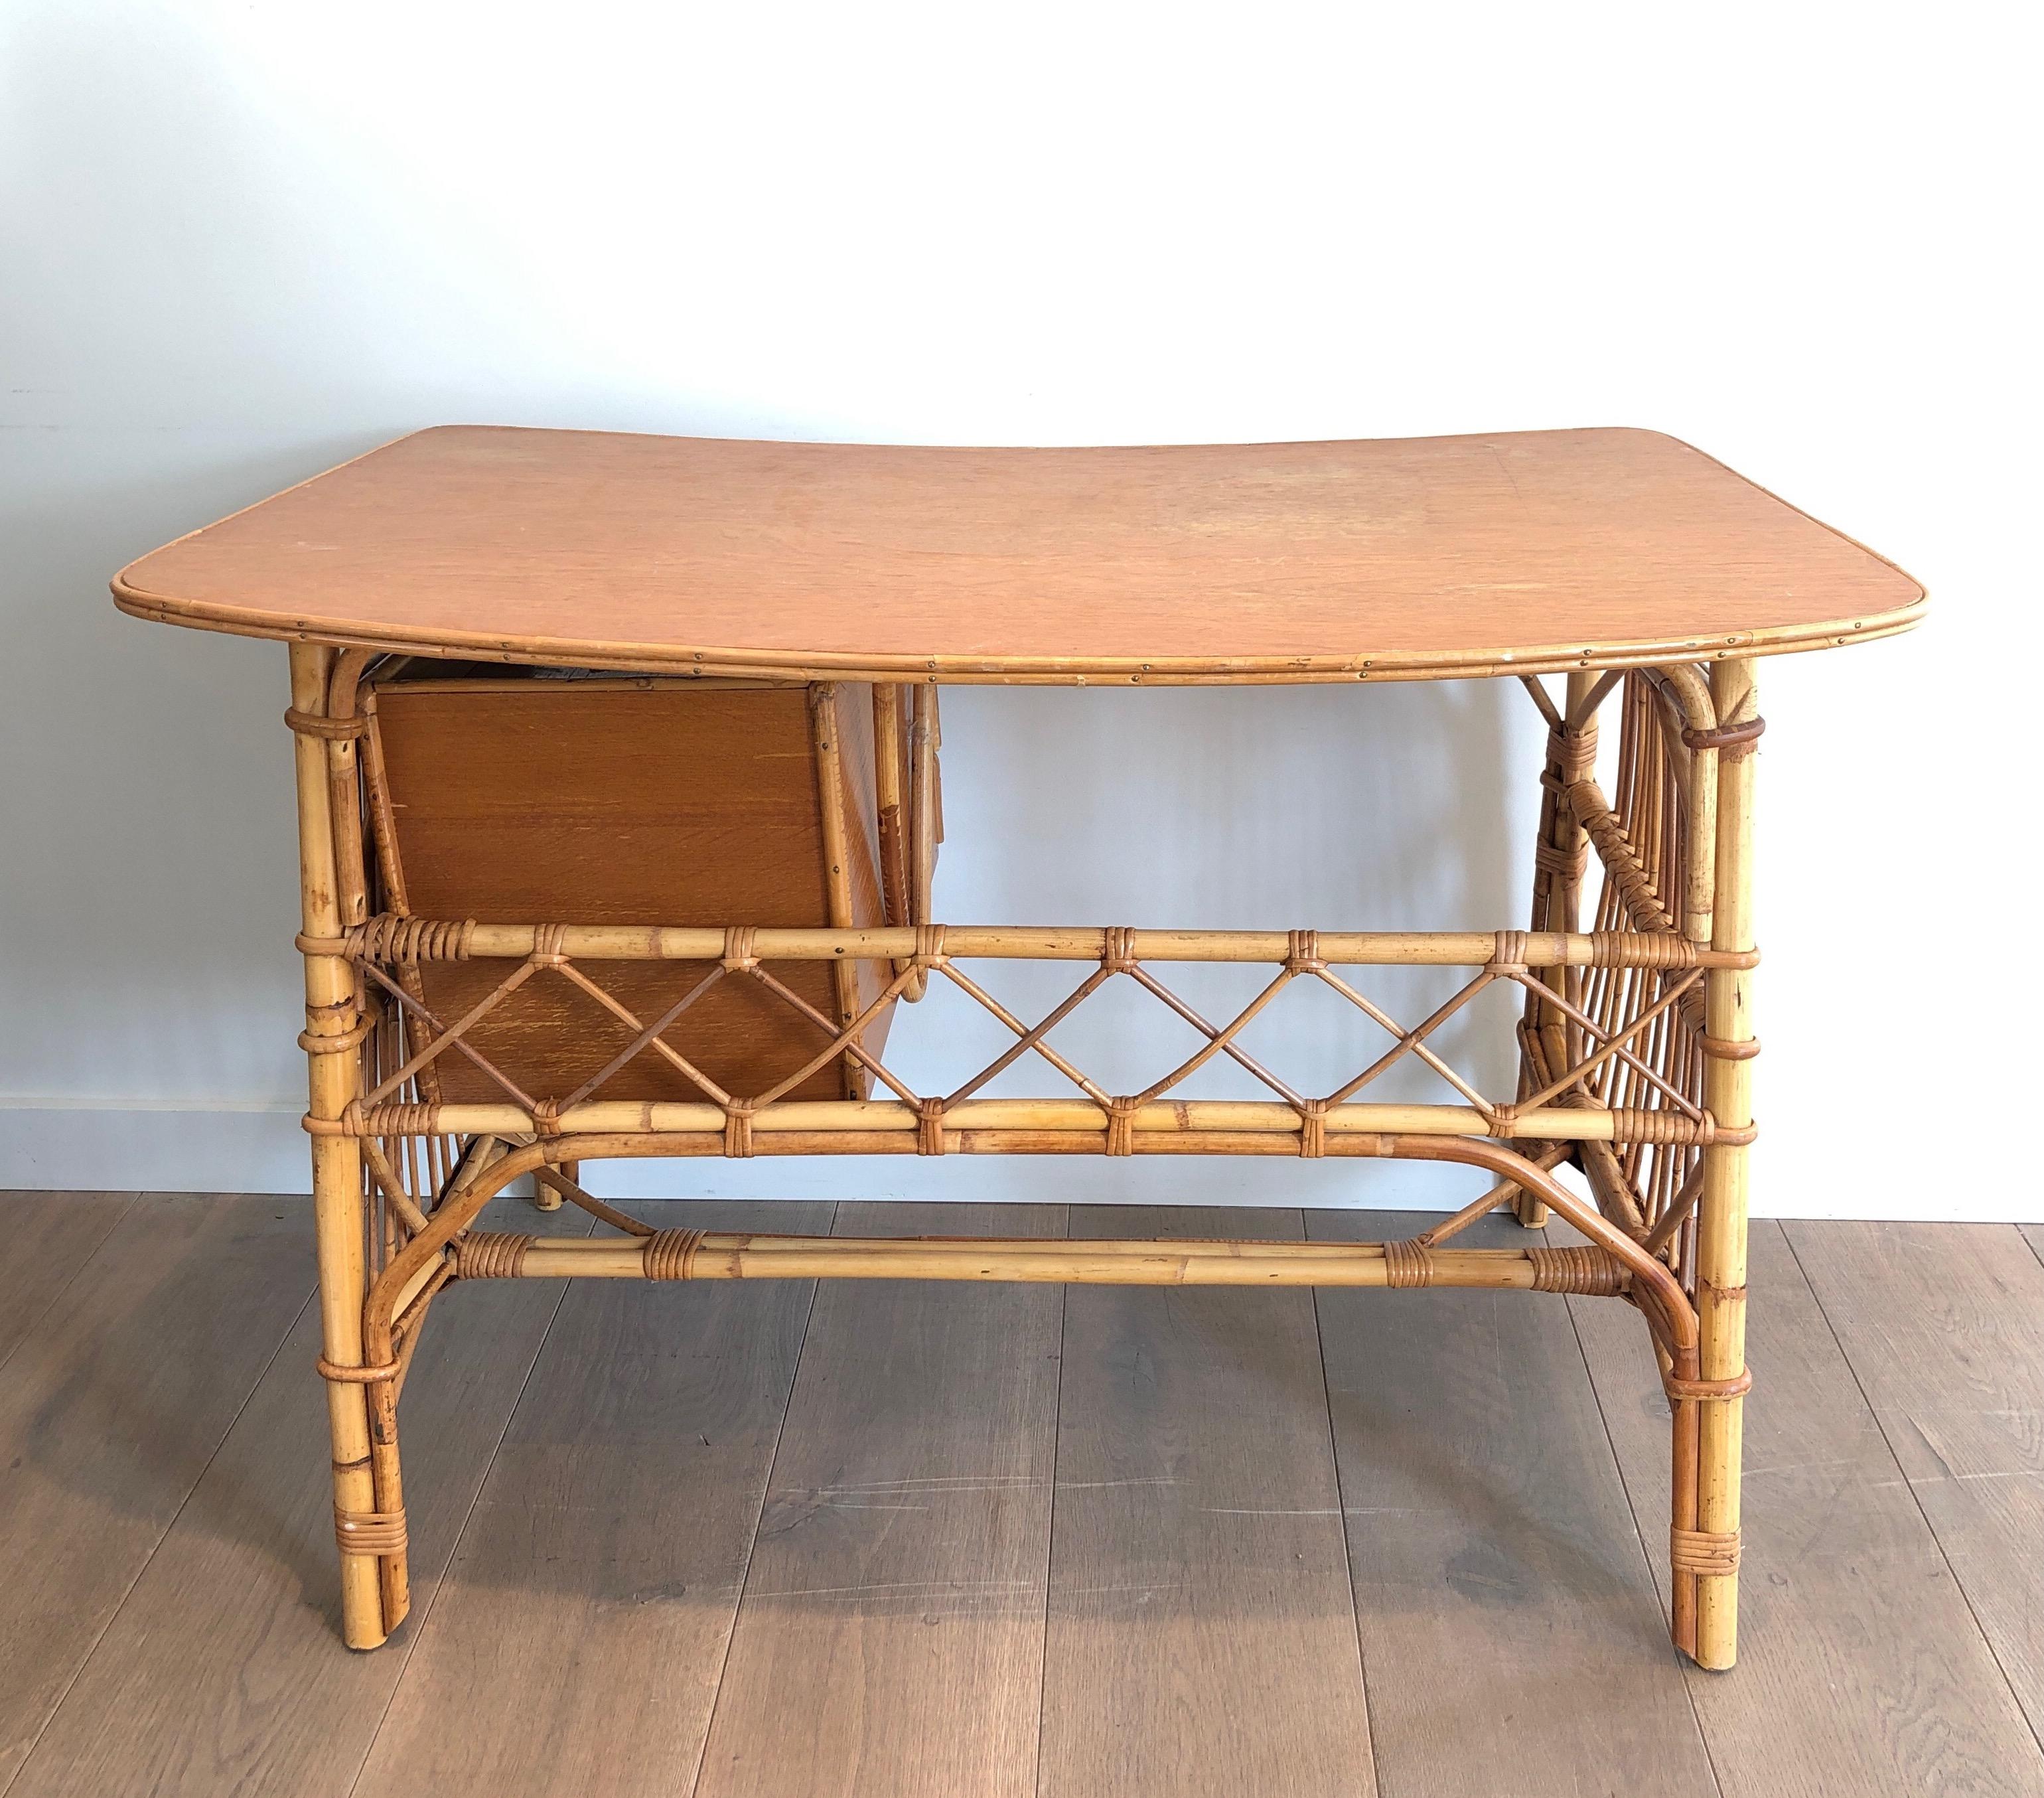 Late 20th Century Attributed to Audoux Minet, Rattan Desk with Drawers, French, Circa 1970 For Sale